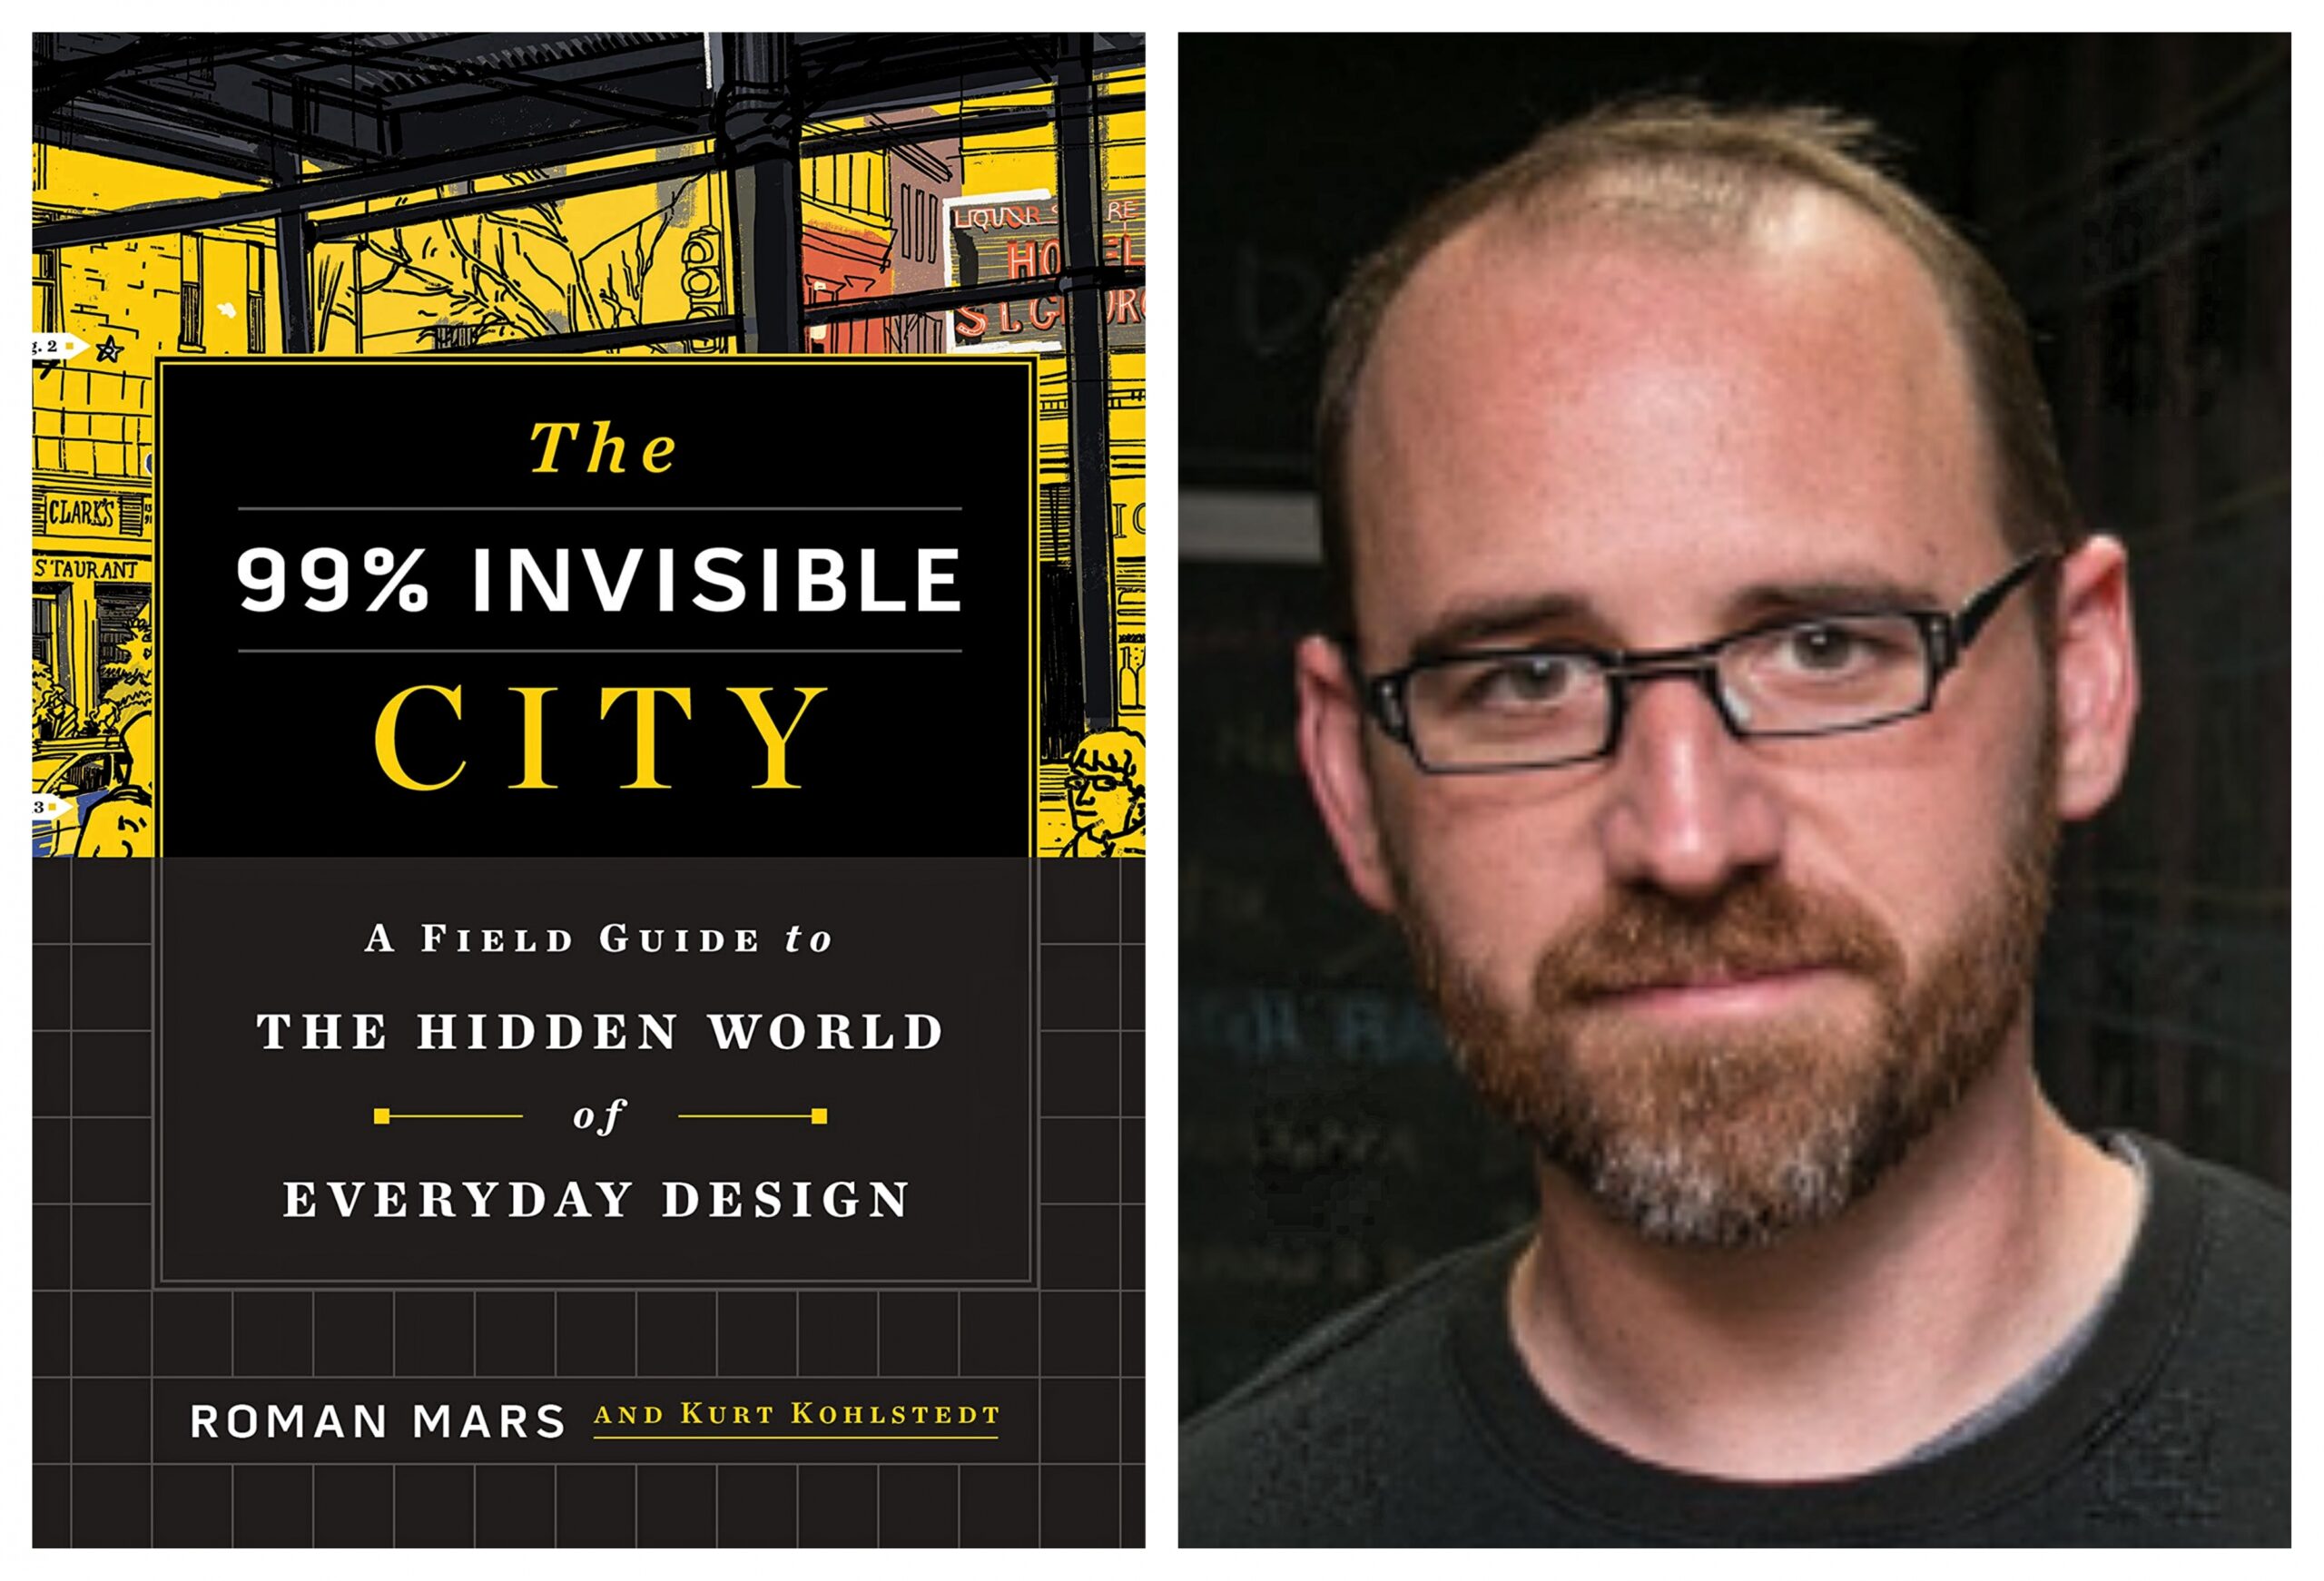 99% Invisible podcast book cover and co-author Roman Mars